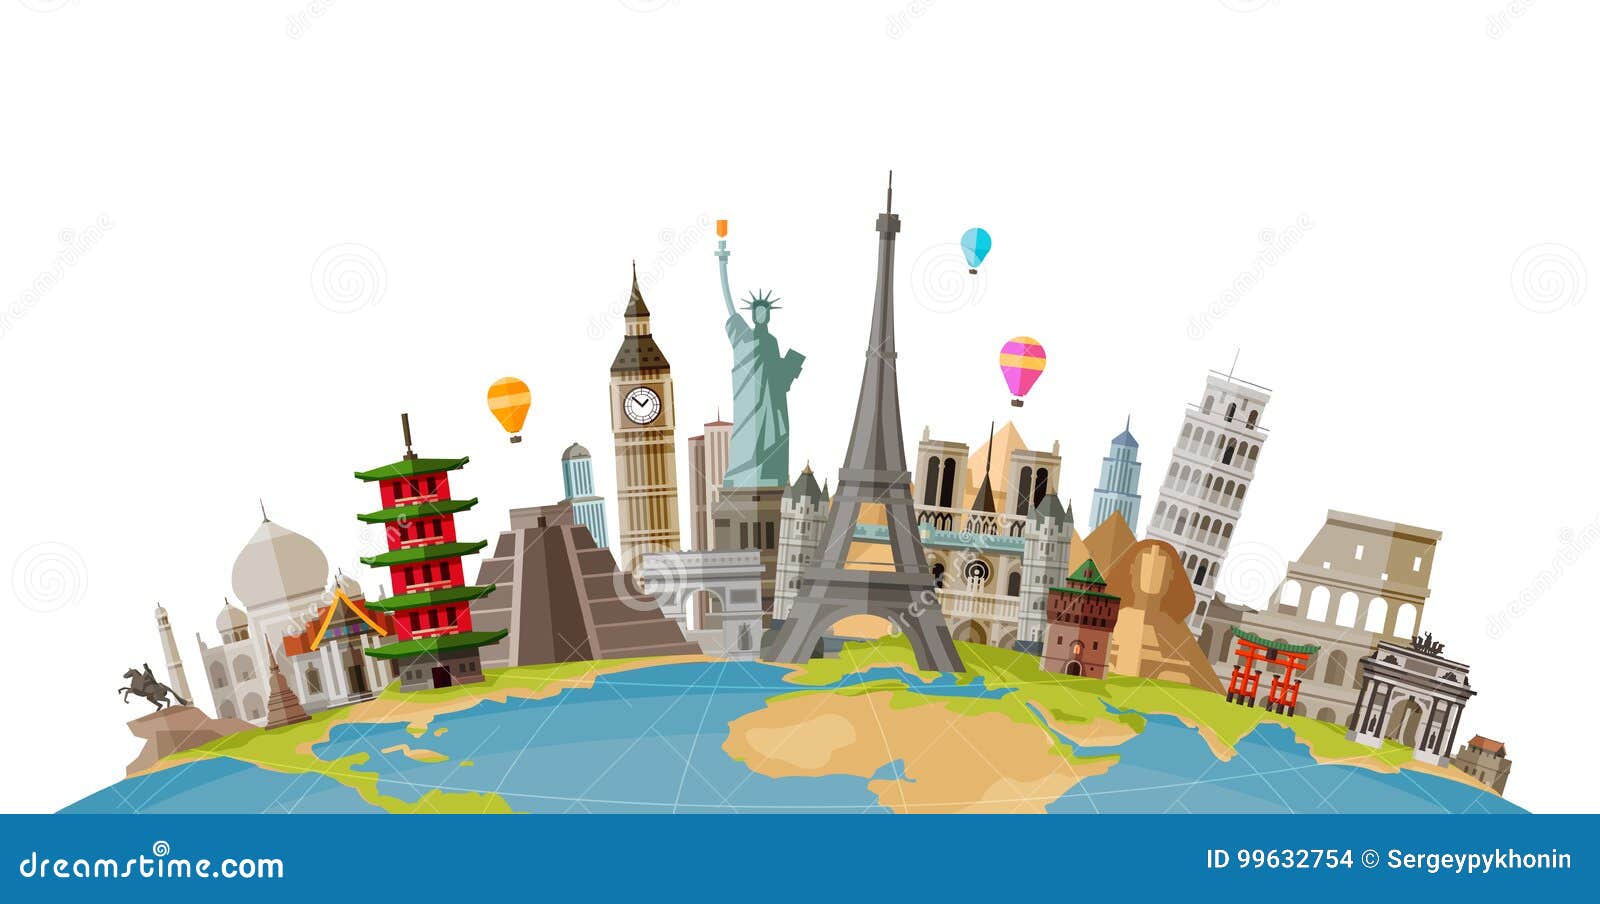 travel, journey concept. famous monuments of world countries.  